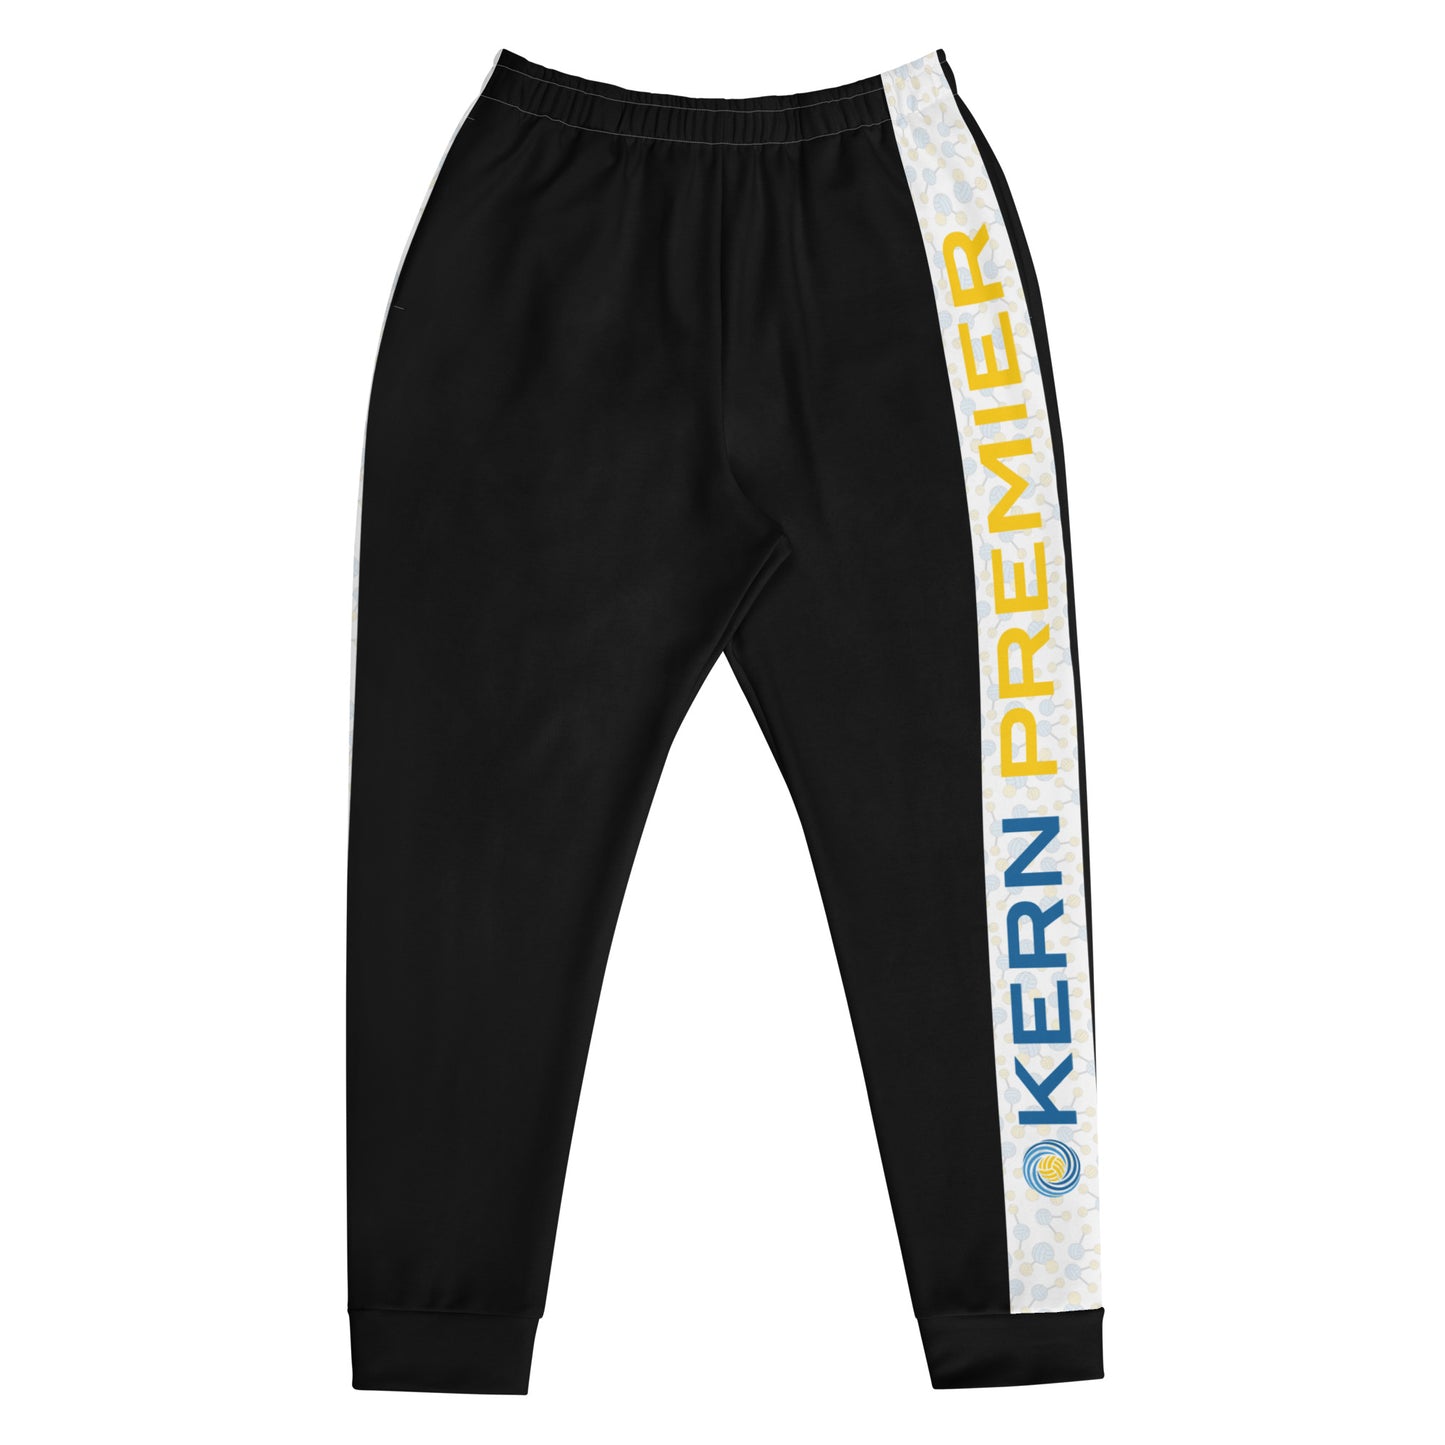 Kern Premier - Black with H20 Waterpolo Molecule Stripe and Logo - Joggers